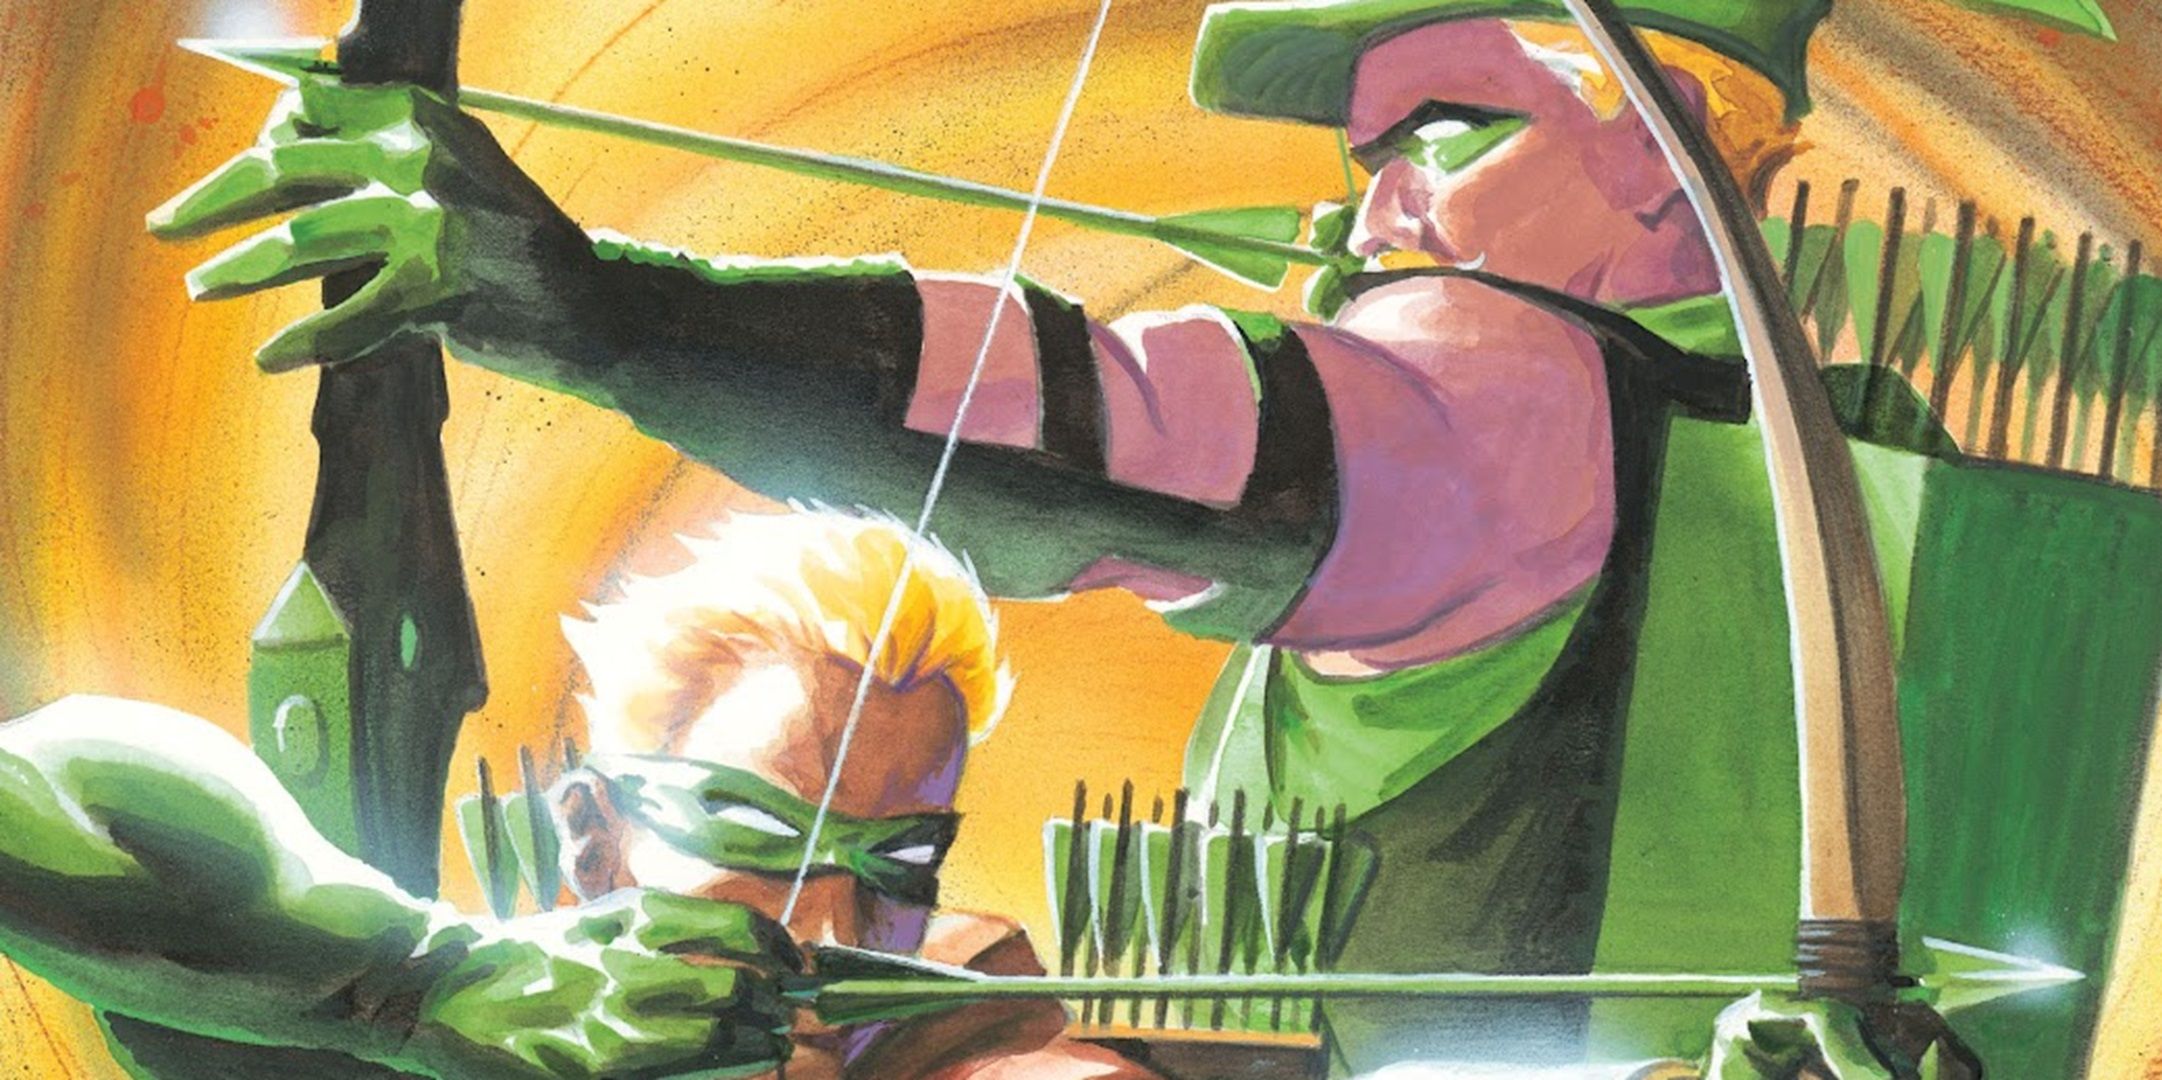 Green Arrow and his son, Connor Hawke